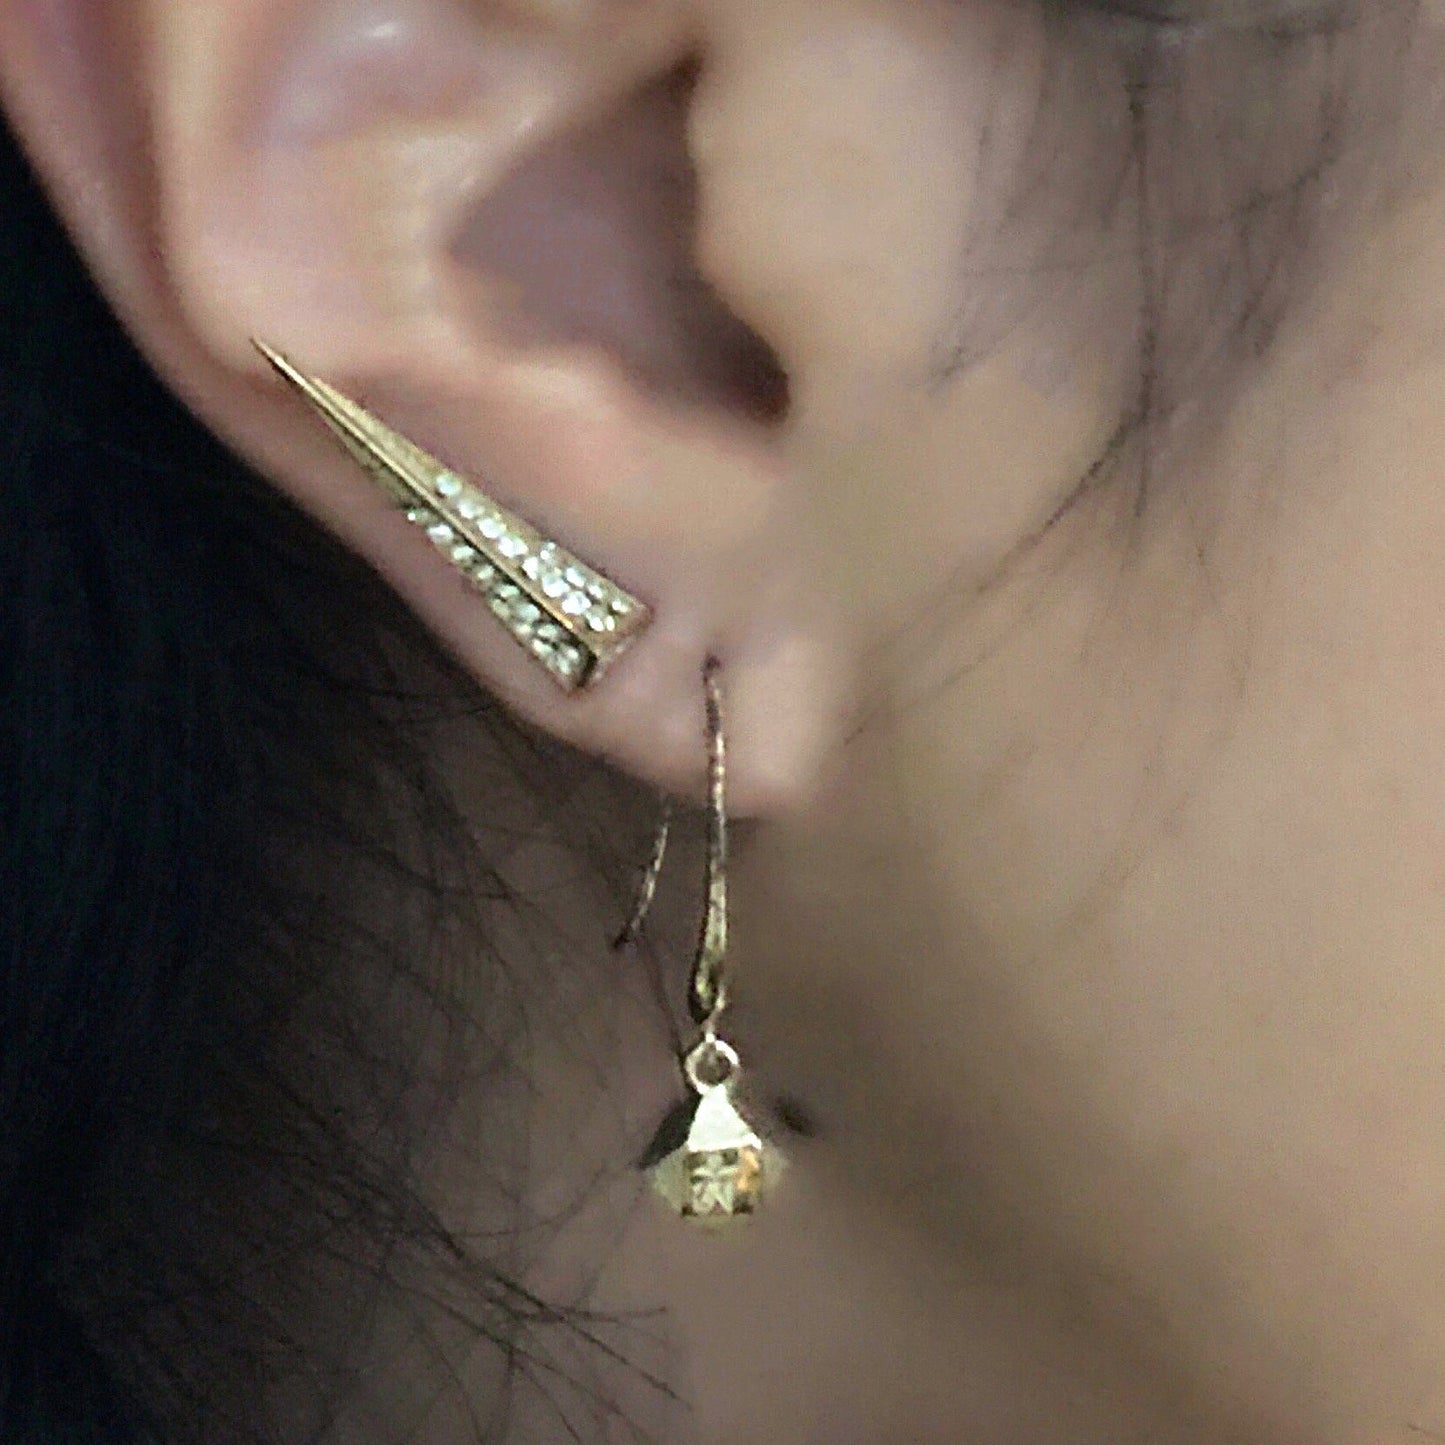 Close up of Mantra Dagger with Swarovski Crystal earrings and Mantra Cube Earrings